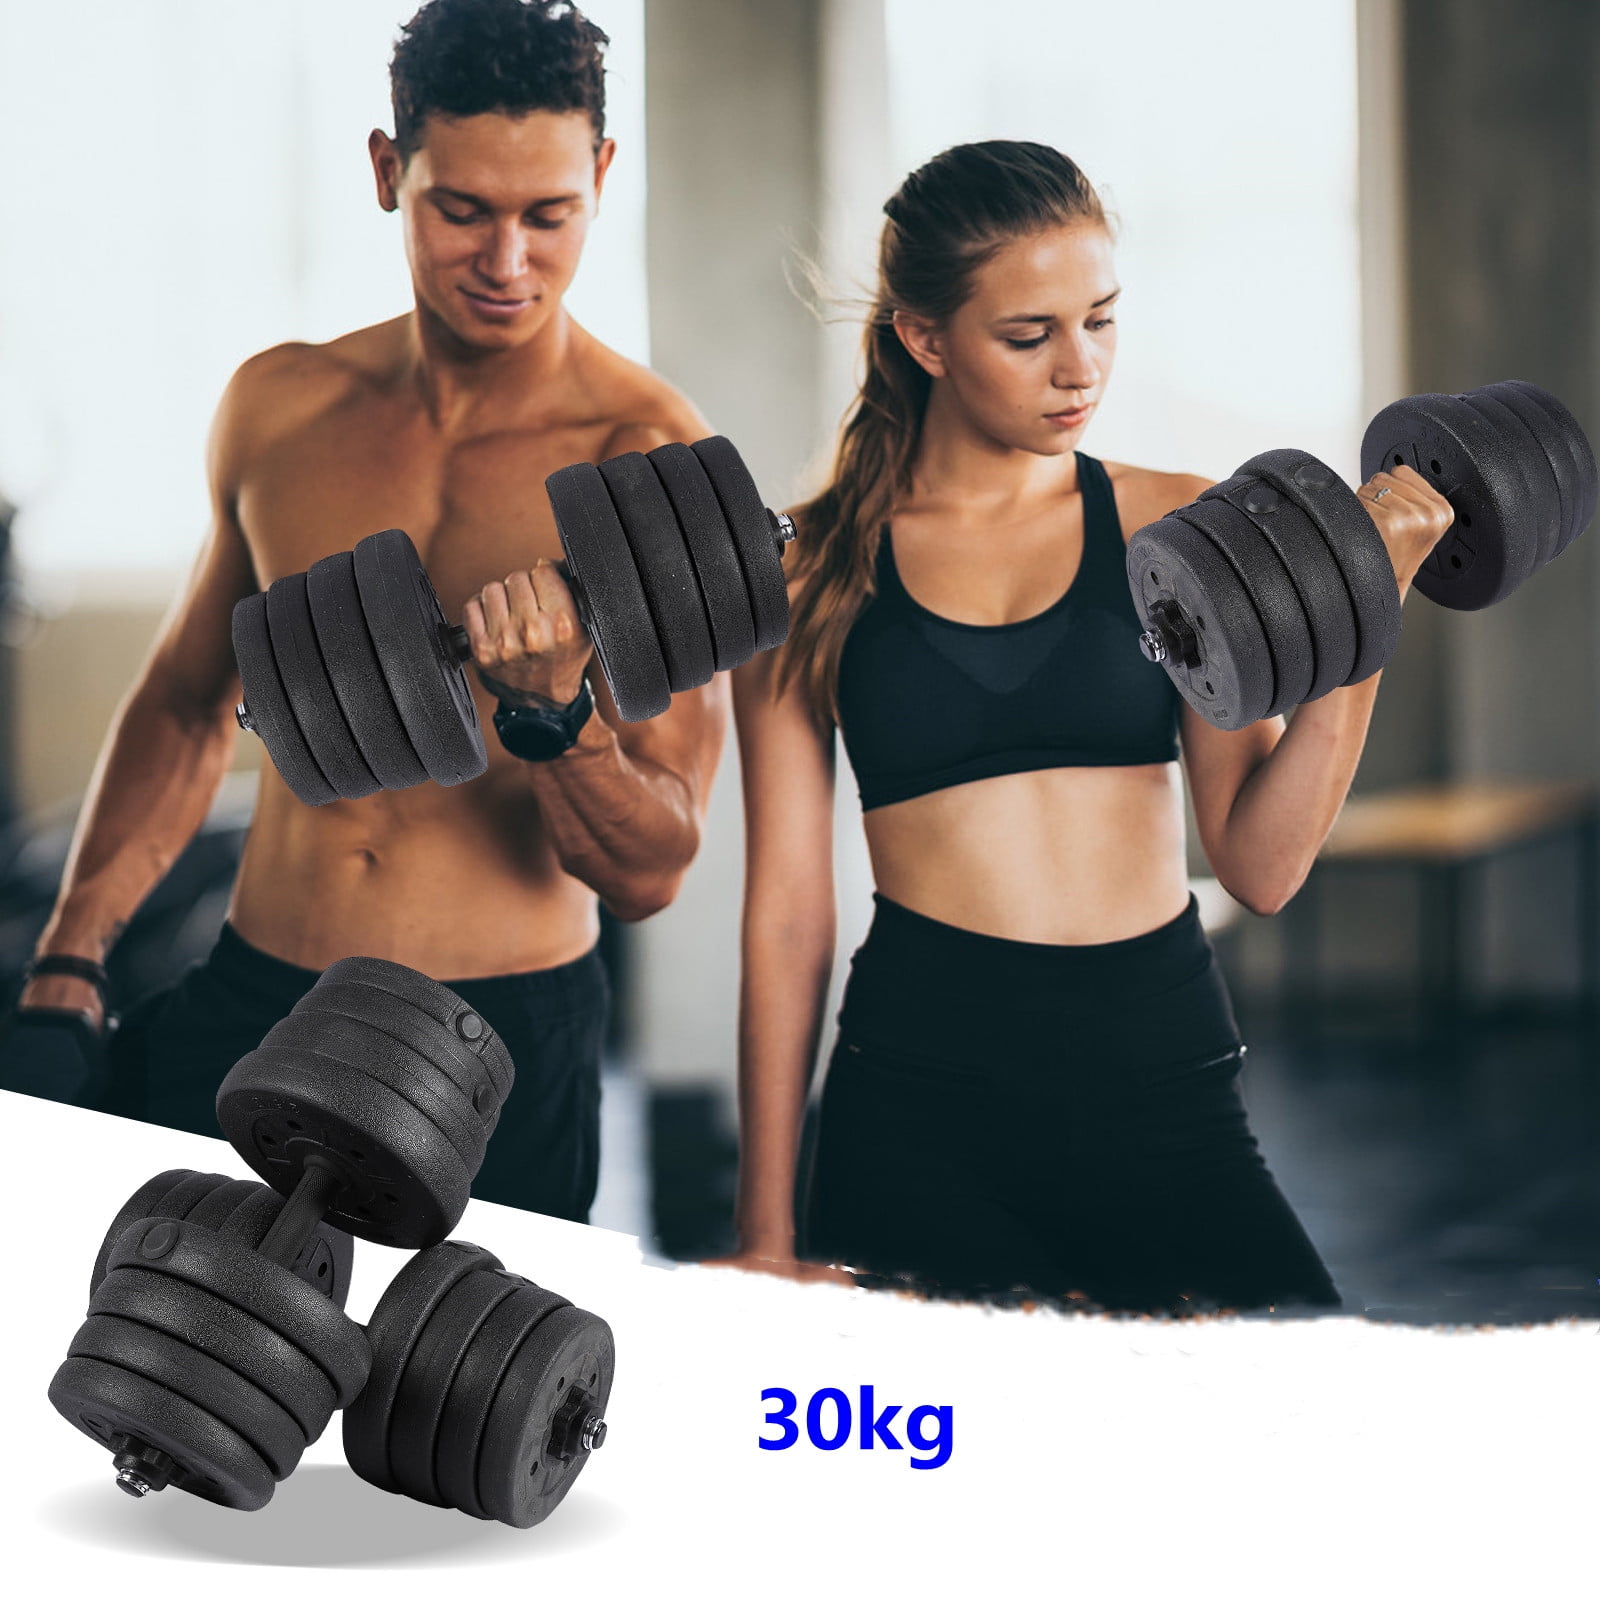 2x15KG Dumbbell Set GYM Weight Lifting Bar Weights Kit Dumbbells Fitness Black 